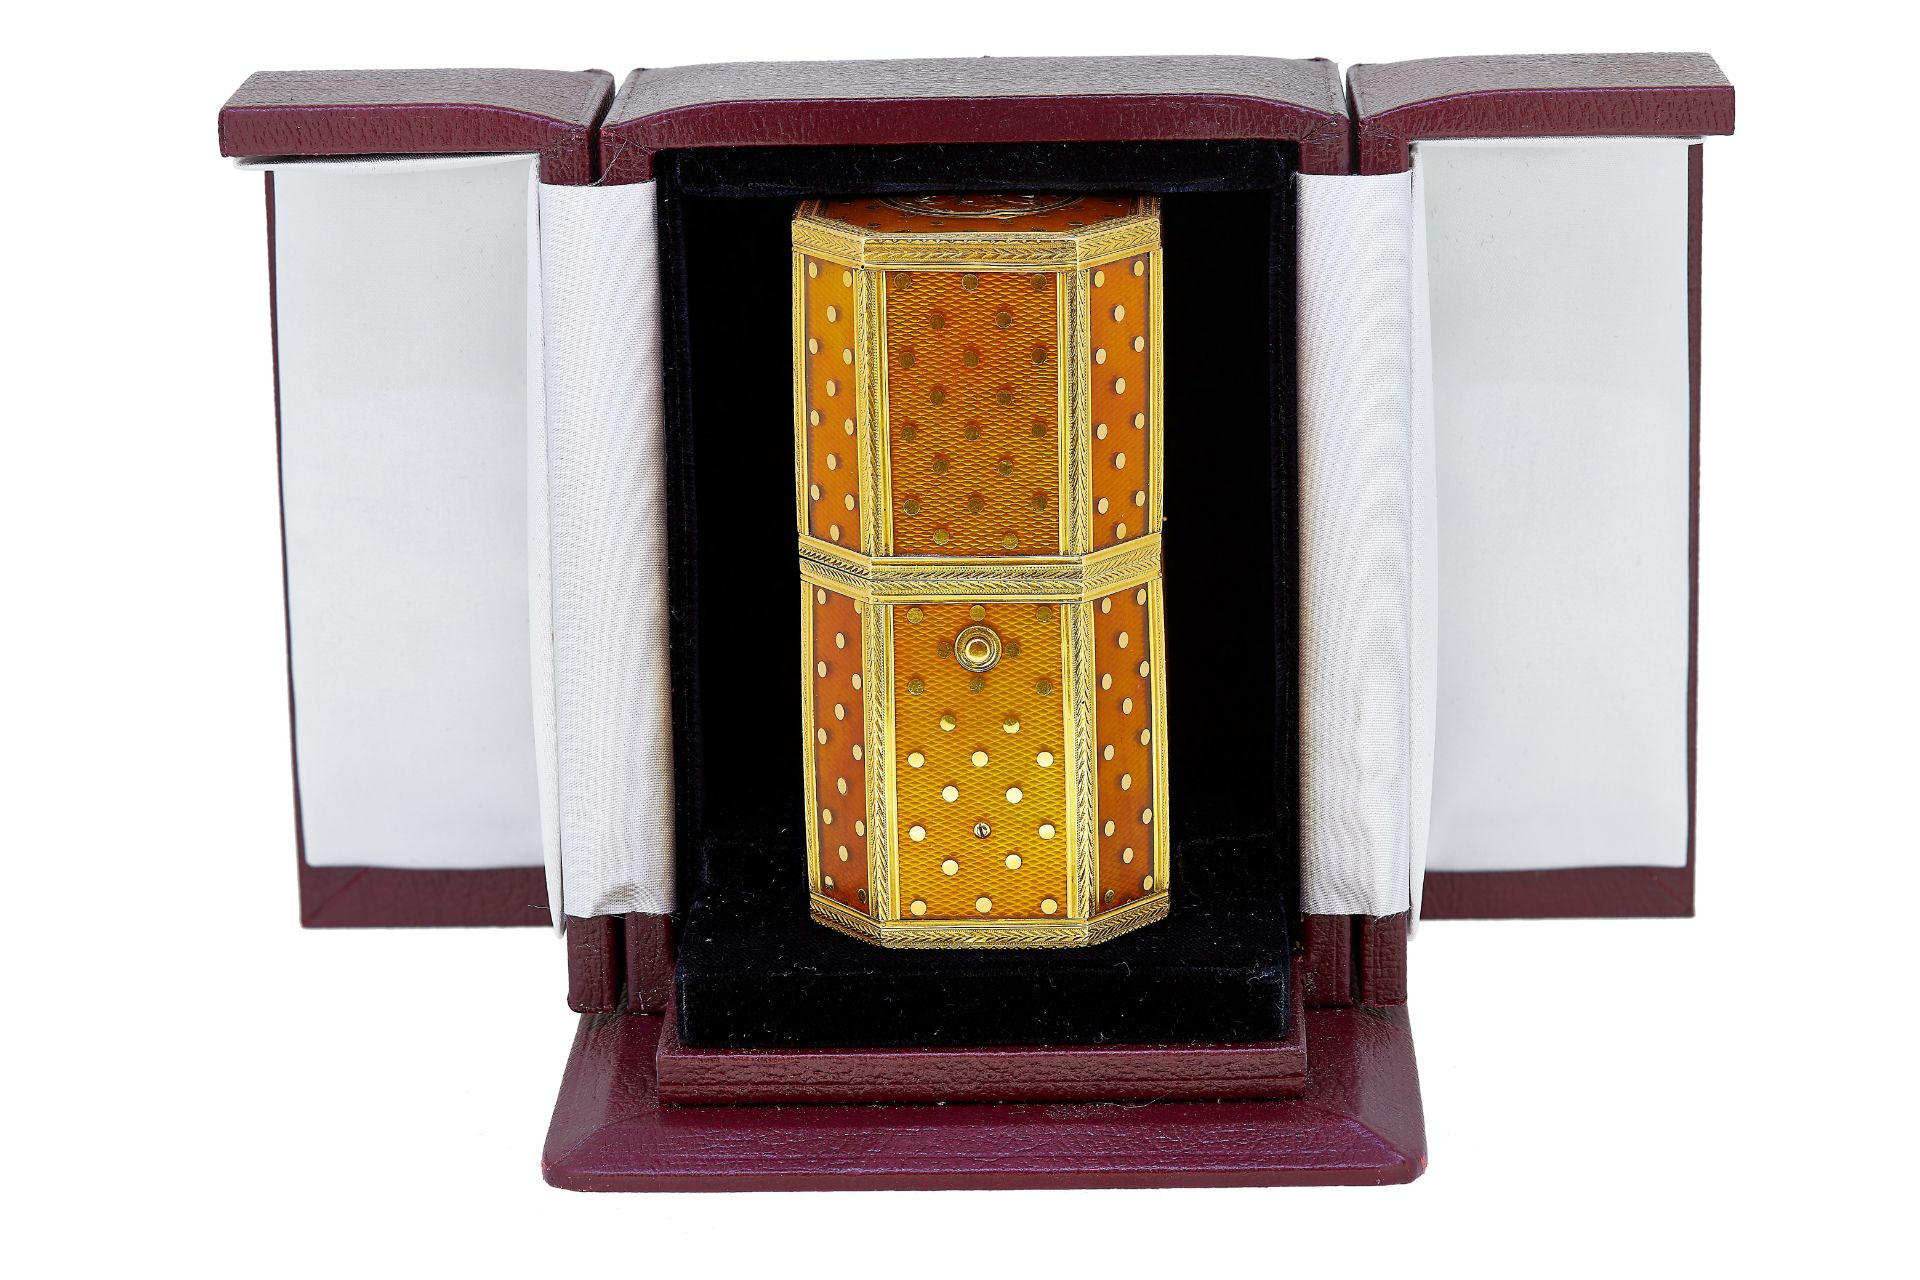 IMPORTANT ENAMEL AND GOLD TRAVEL SEWING ETUI. - Image 3 of 4